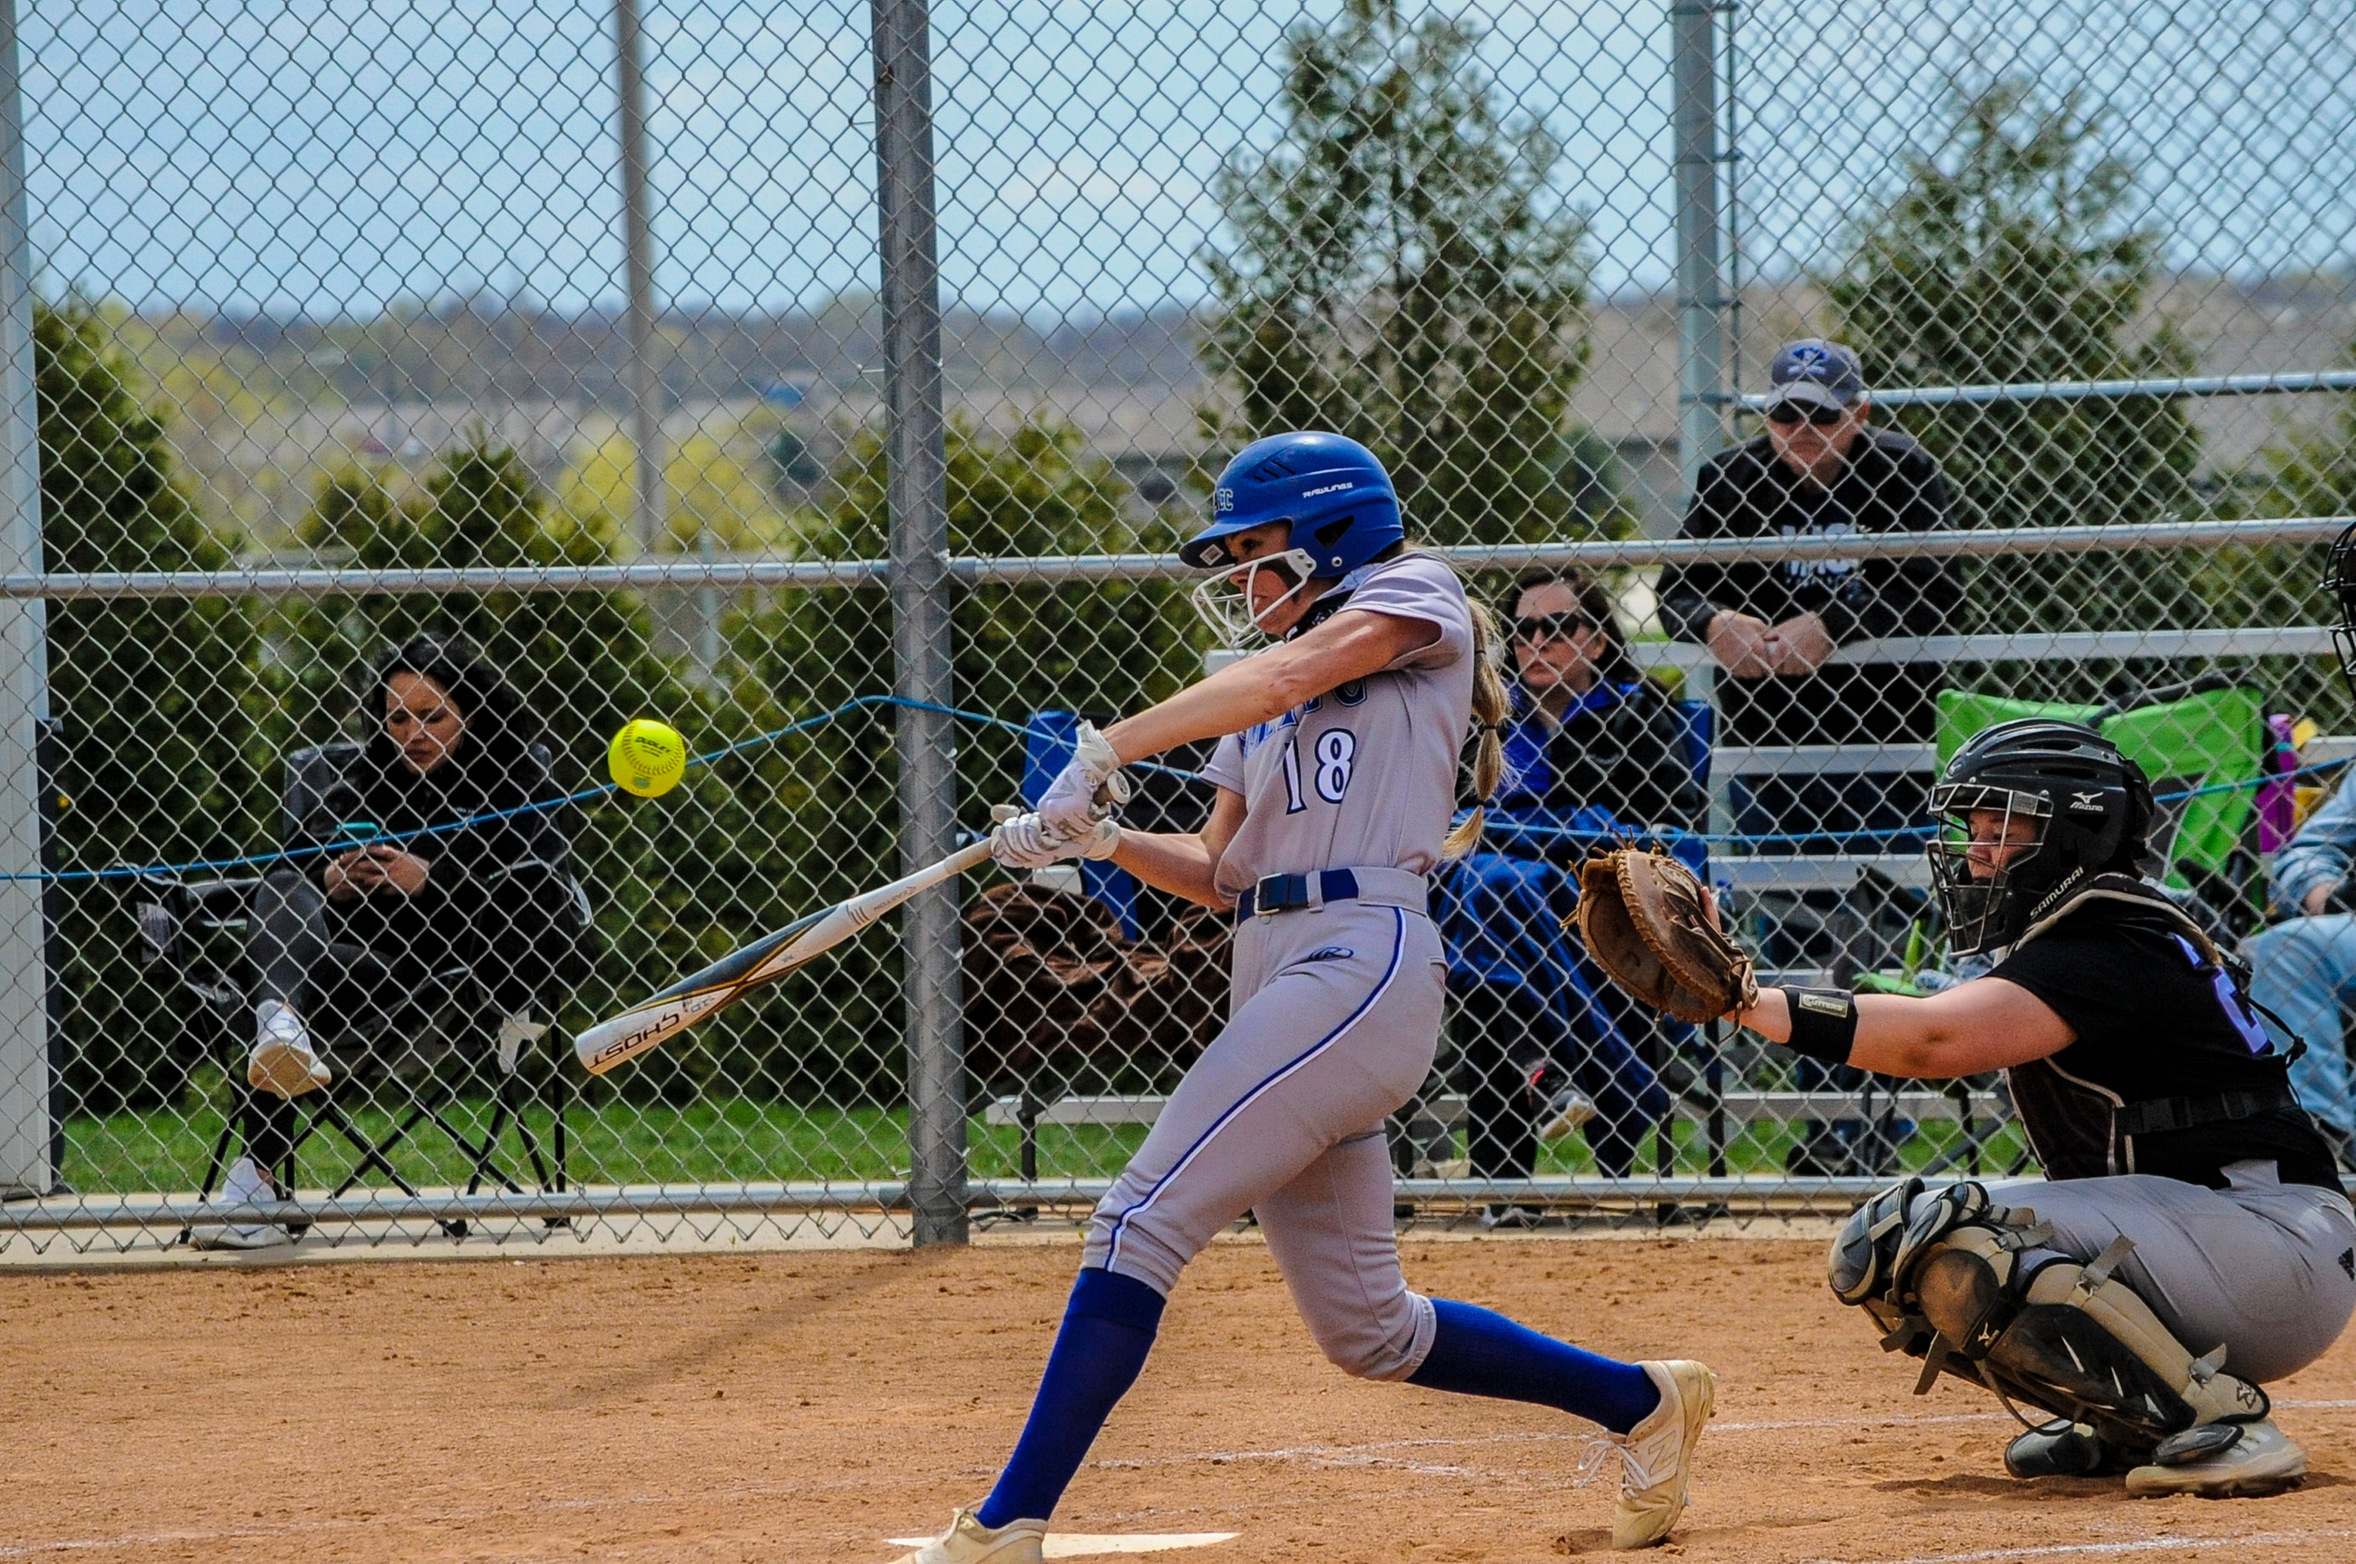 DMACC softball team sweeps four games from IWCC